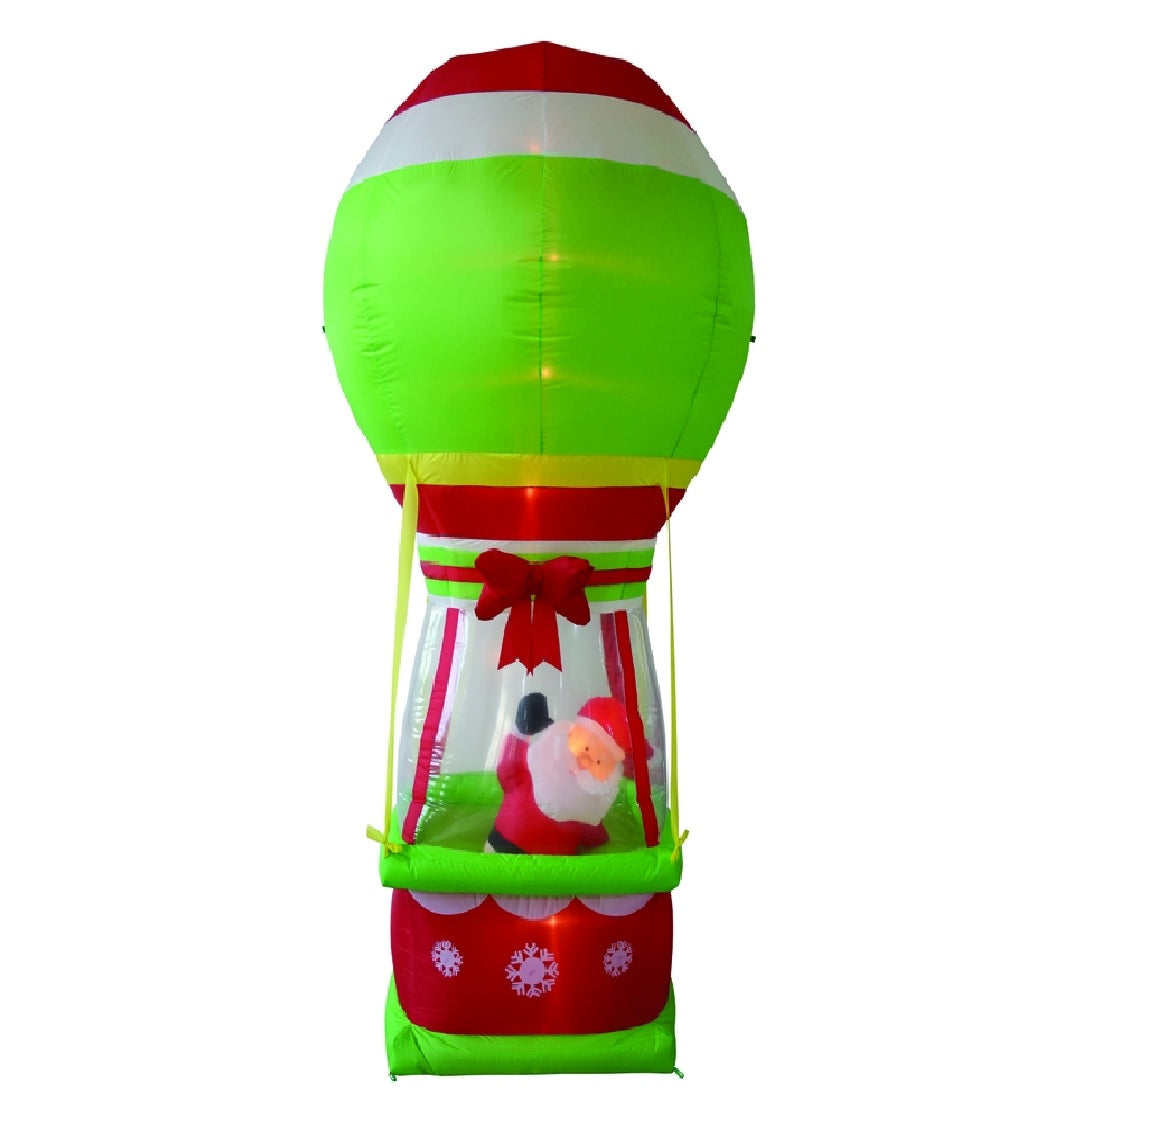 Celebrations YLSW 18565 Inflatable Santa In Hot Air Balloon